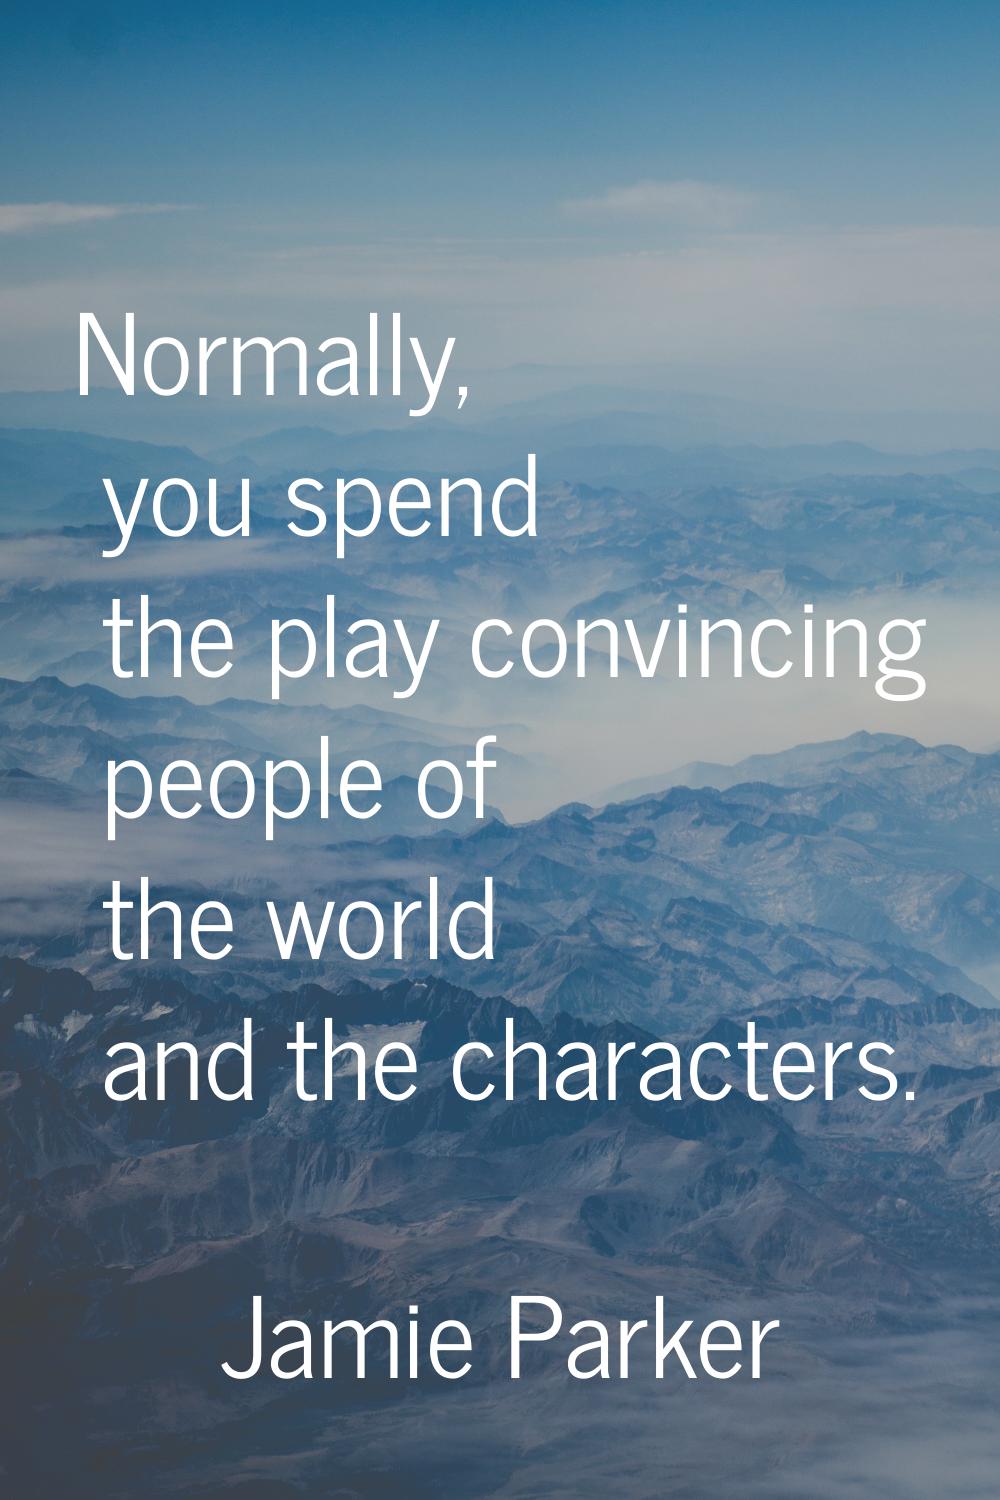 Normally, you spend the play convincing people of the world and the characters.